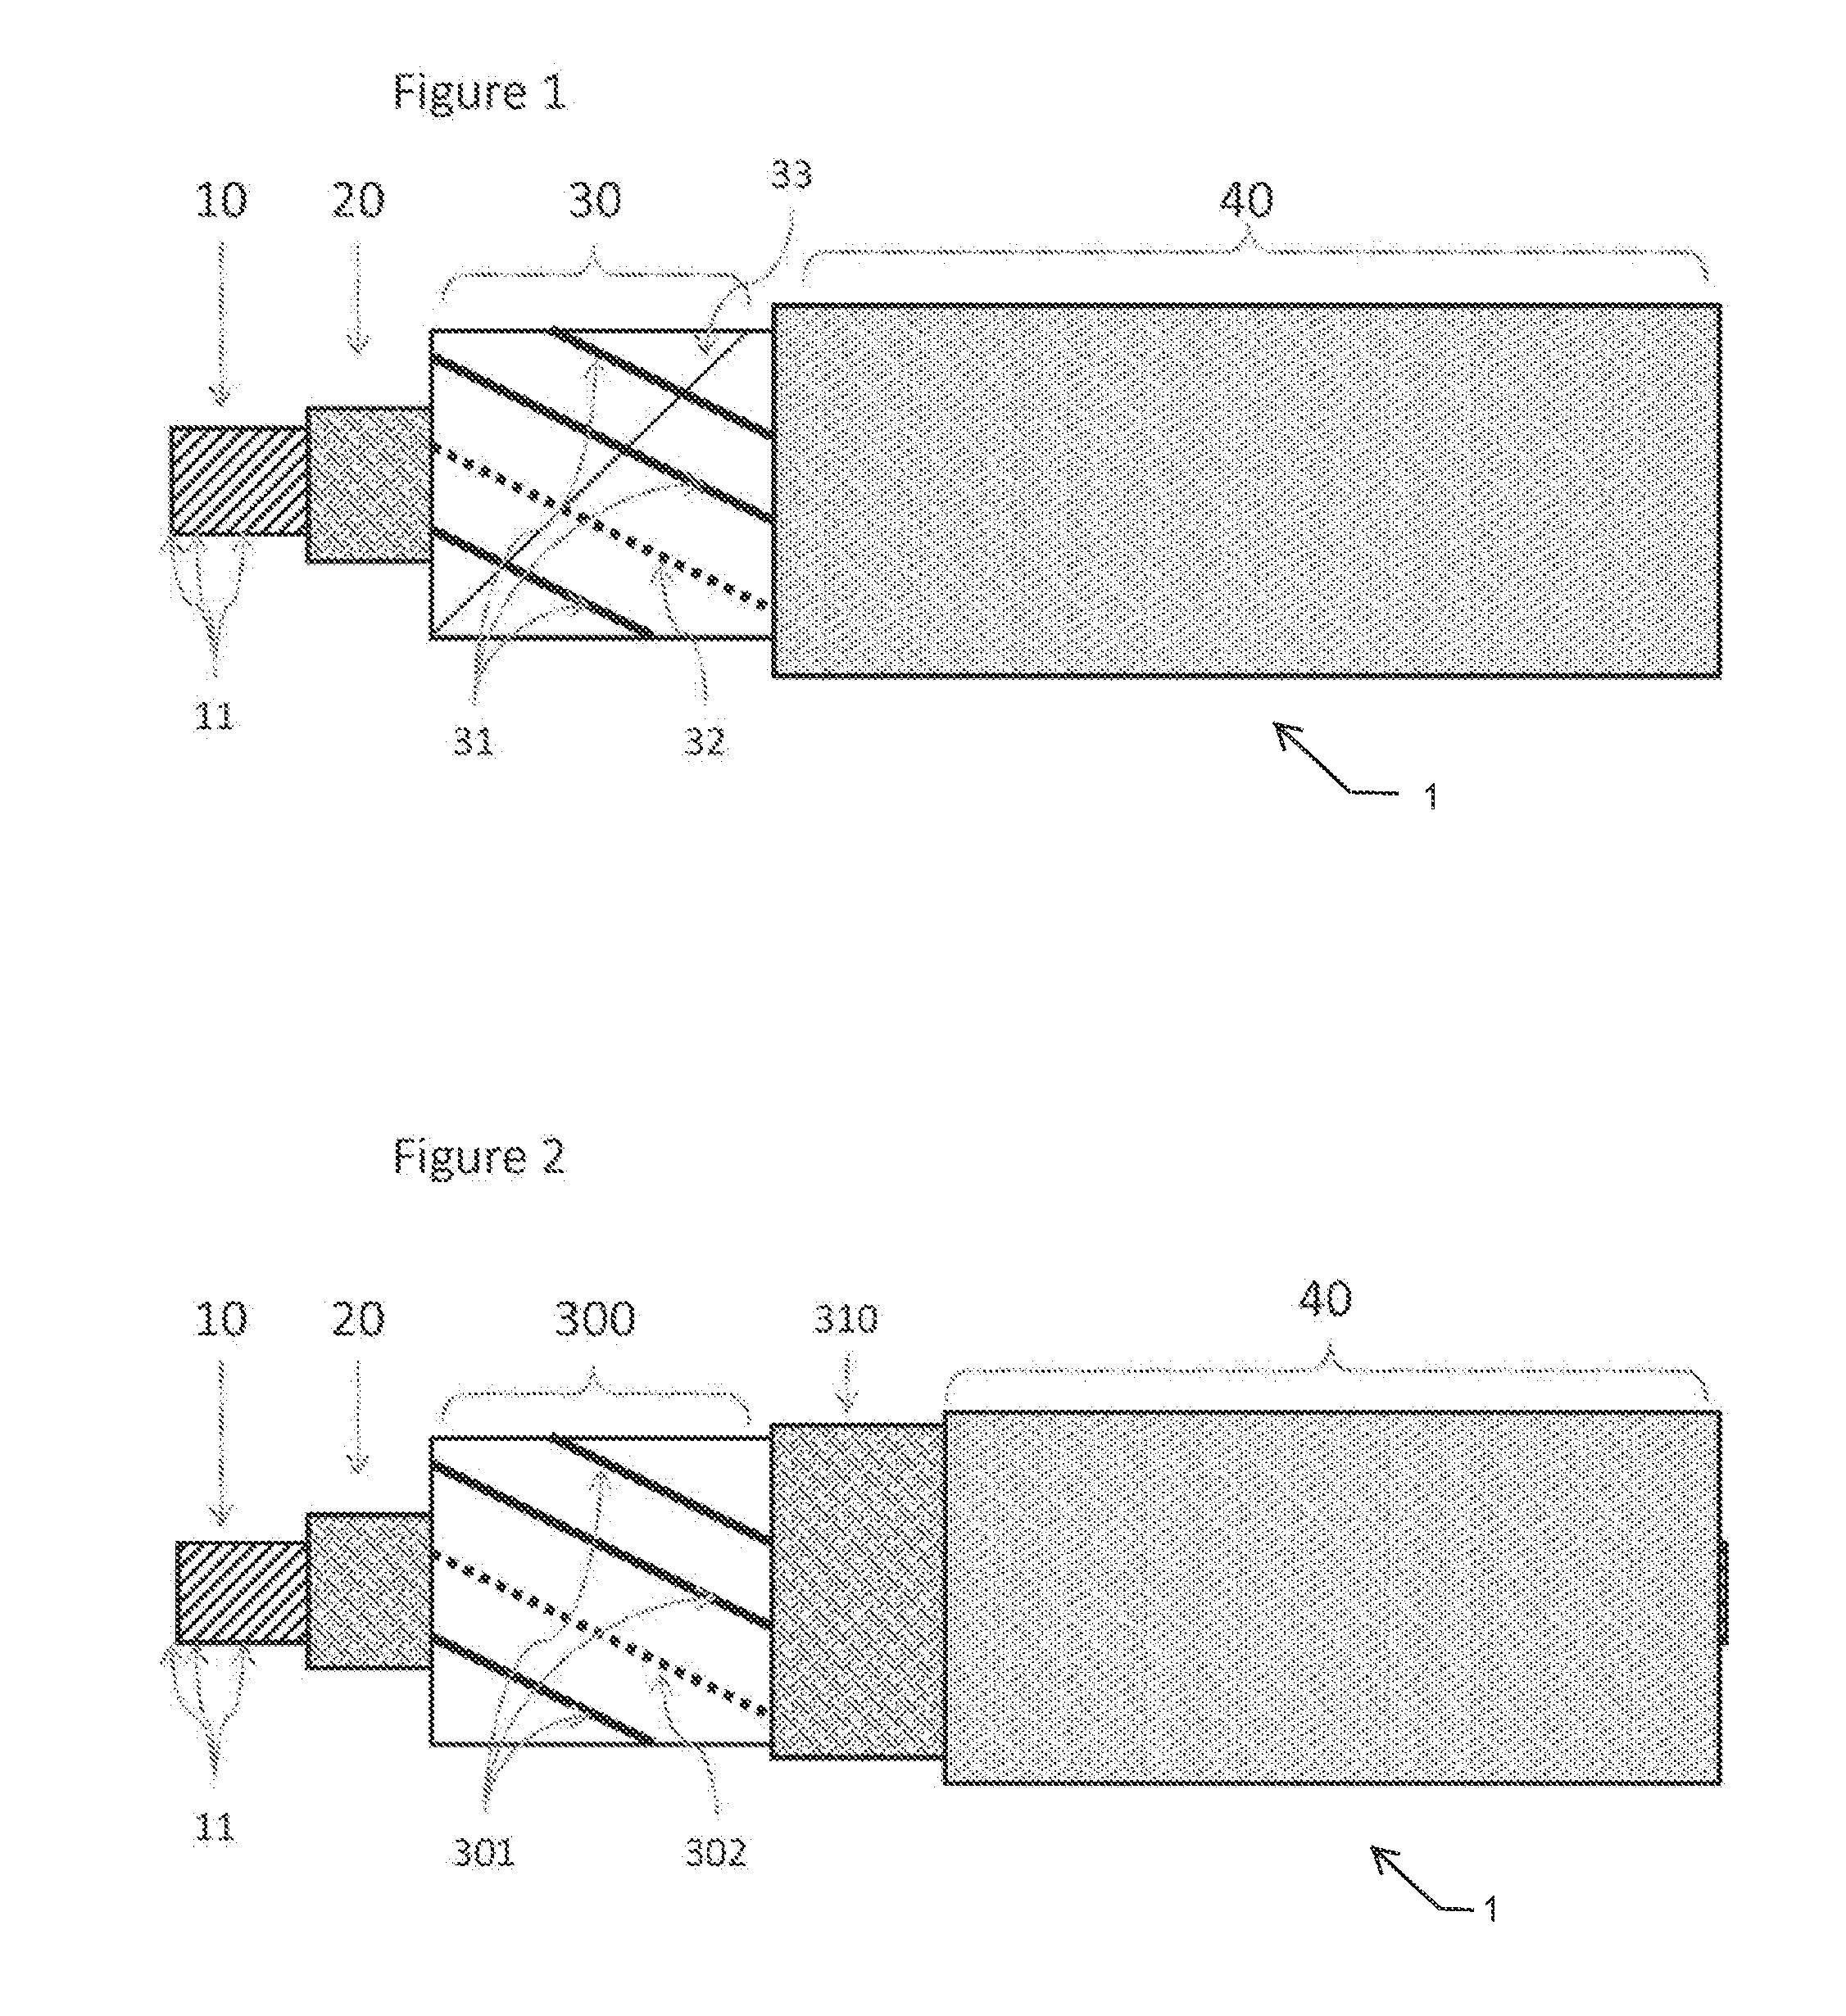 High strength tether for transmitting power and communications signals